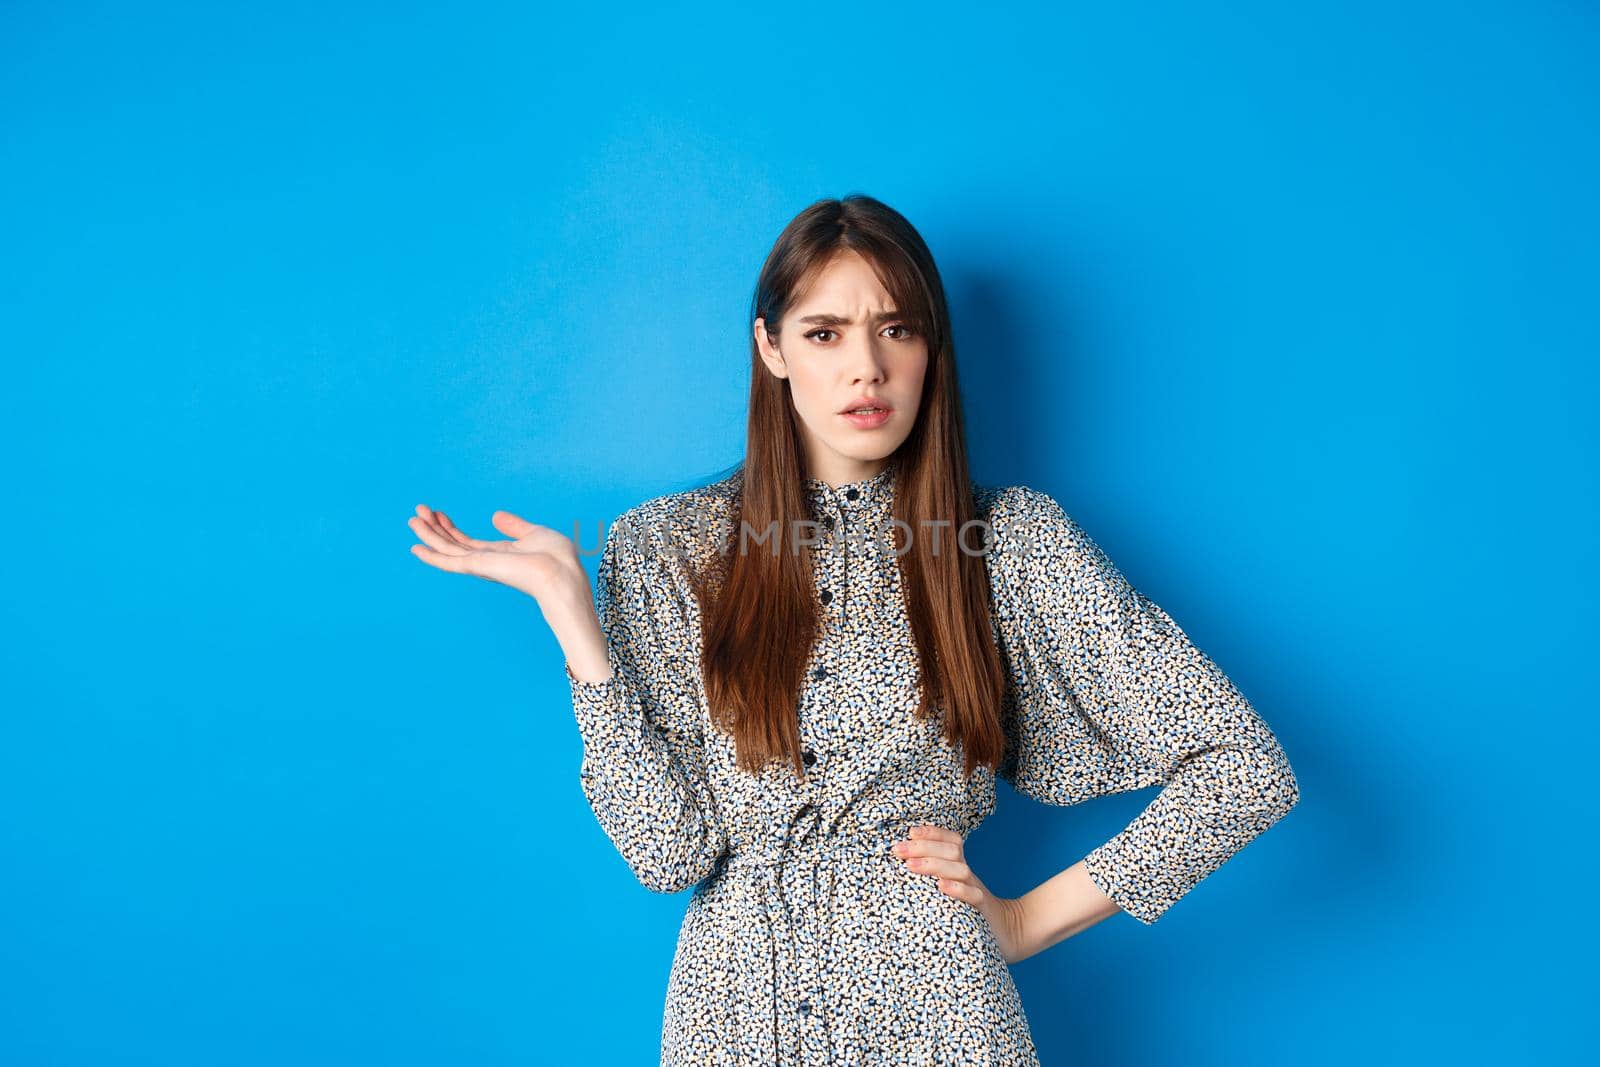 Confused and annoyed girl arguing, raising hand up and frowning, cant understand what big deal, standing on blue background.